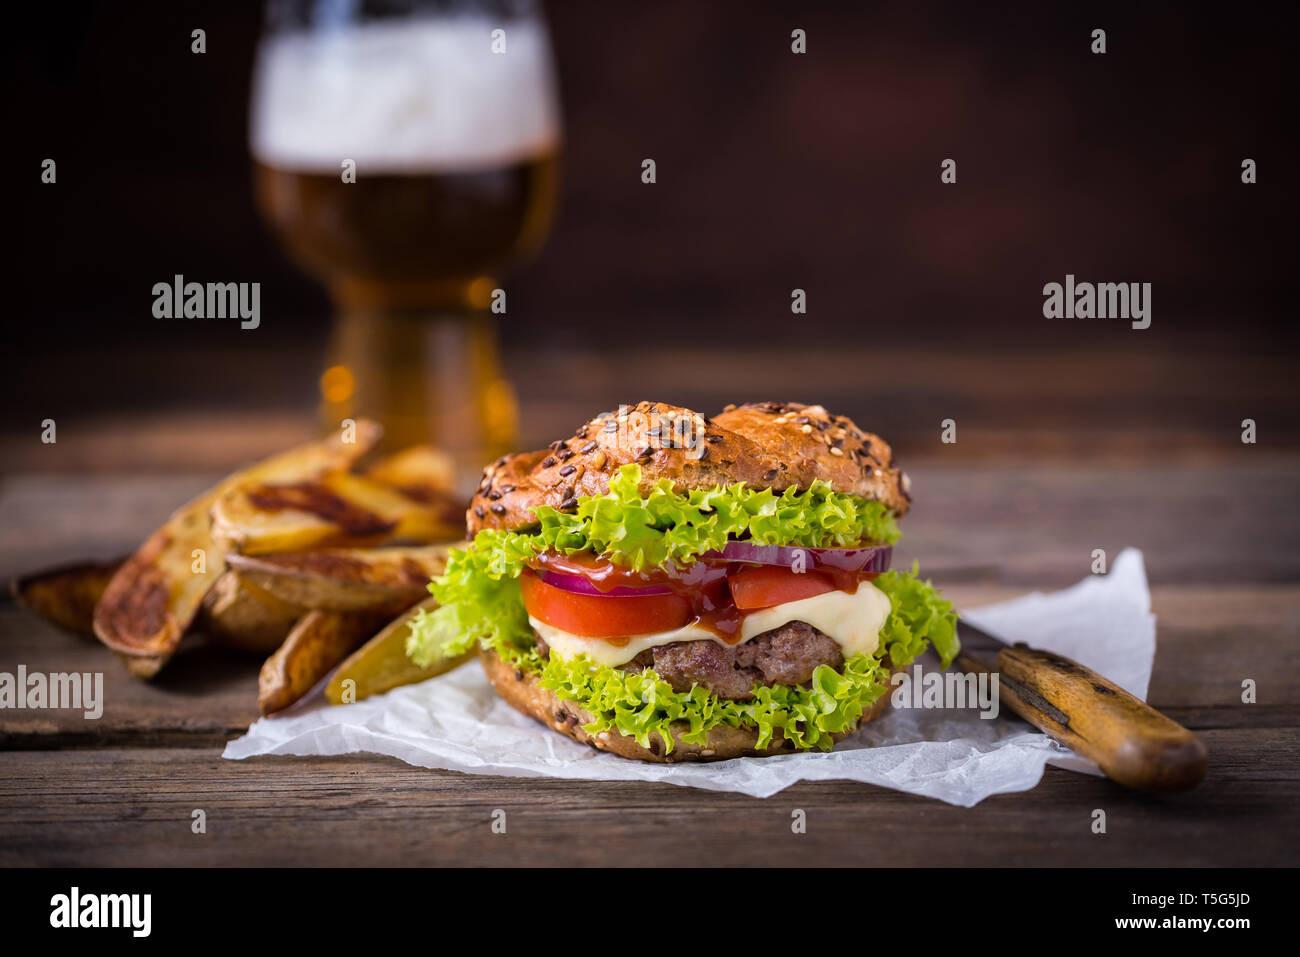 Home made hamburger with green salad on brown wooden background. Stock Photo